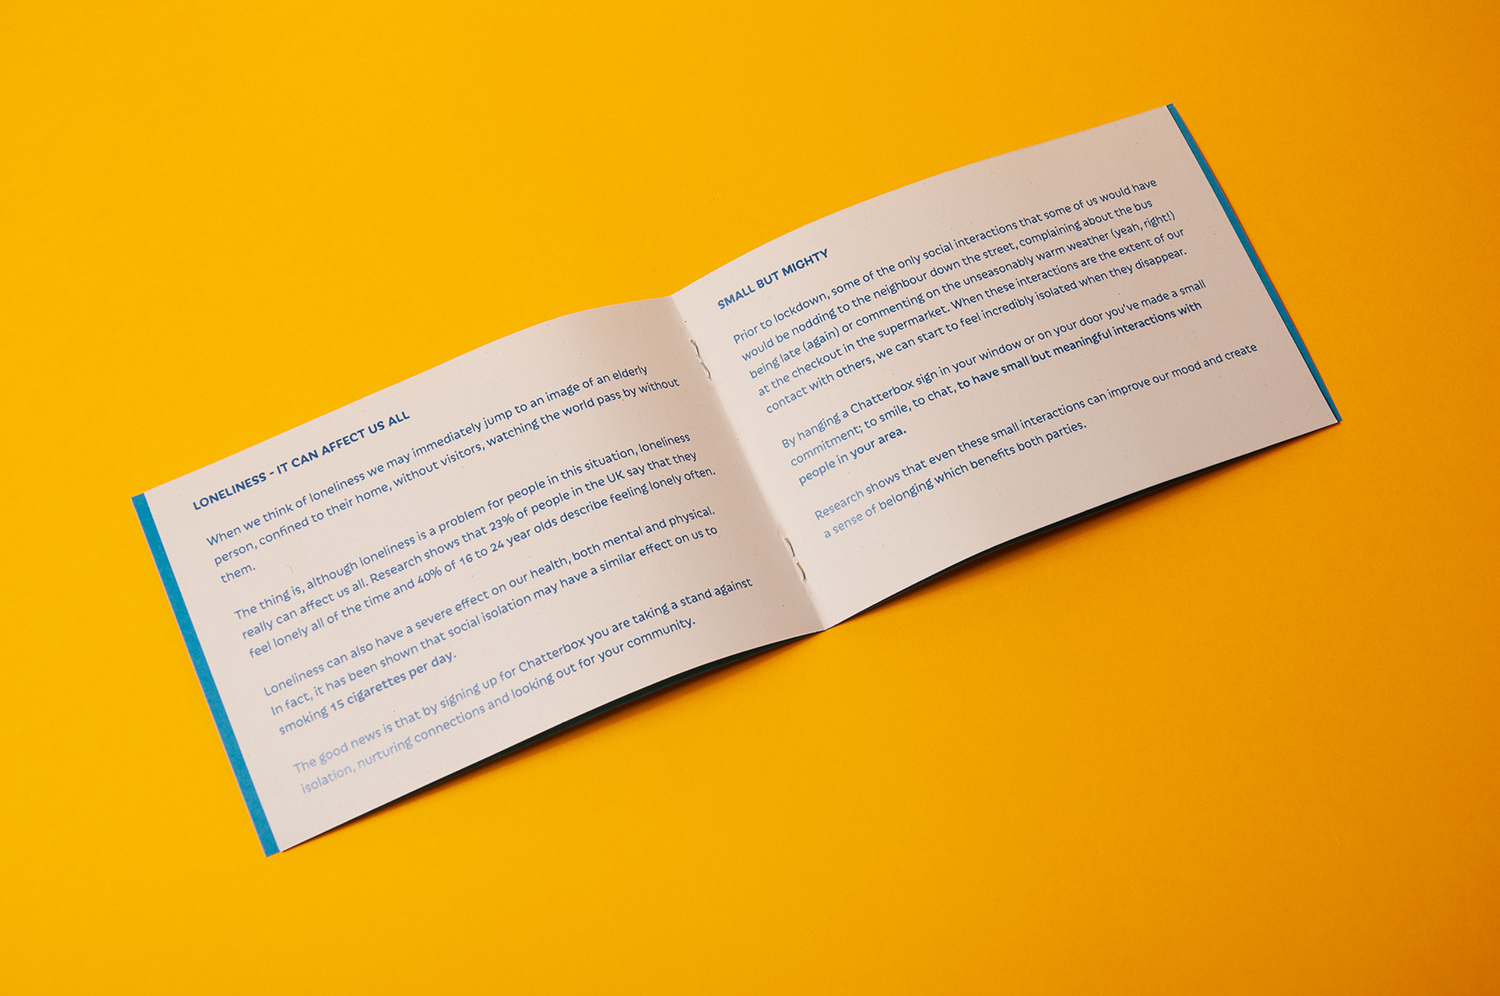 The inner spread of a small A6 booklet against a yellow background.